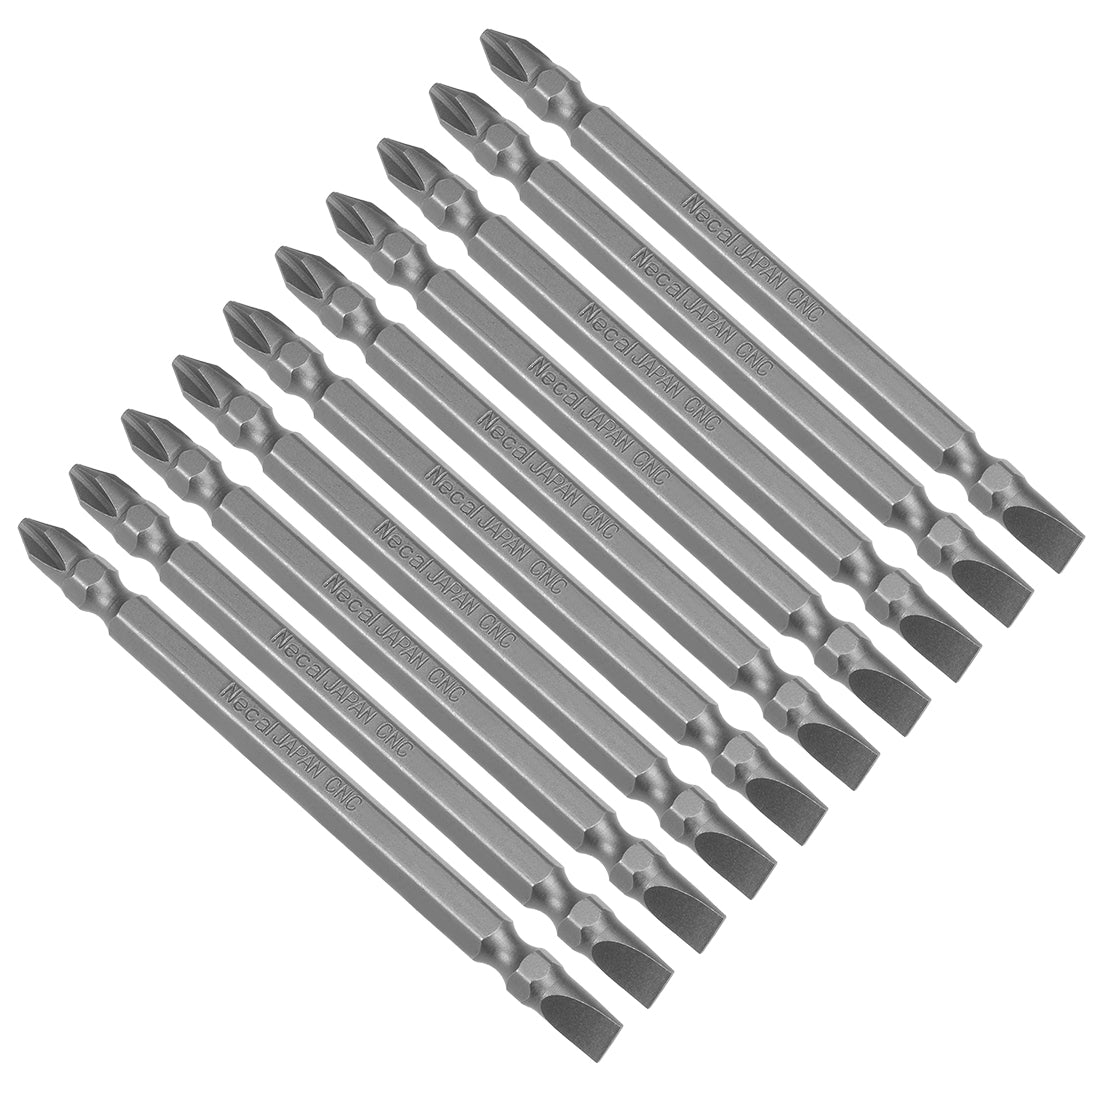 Uxcell Uxcell 10Pcs 150mm Long S2 Magnetic Phillips-Slotted Screwdriver Bits 6PH2 SL6 Hex Head